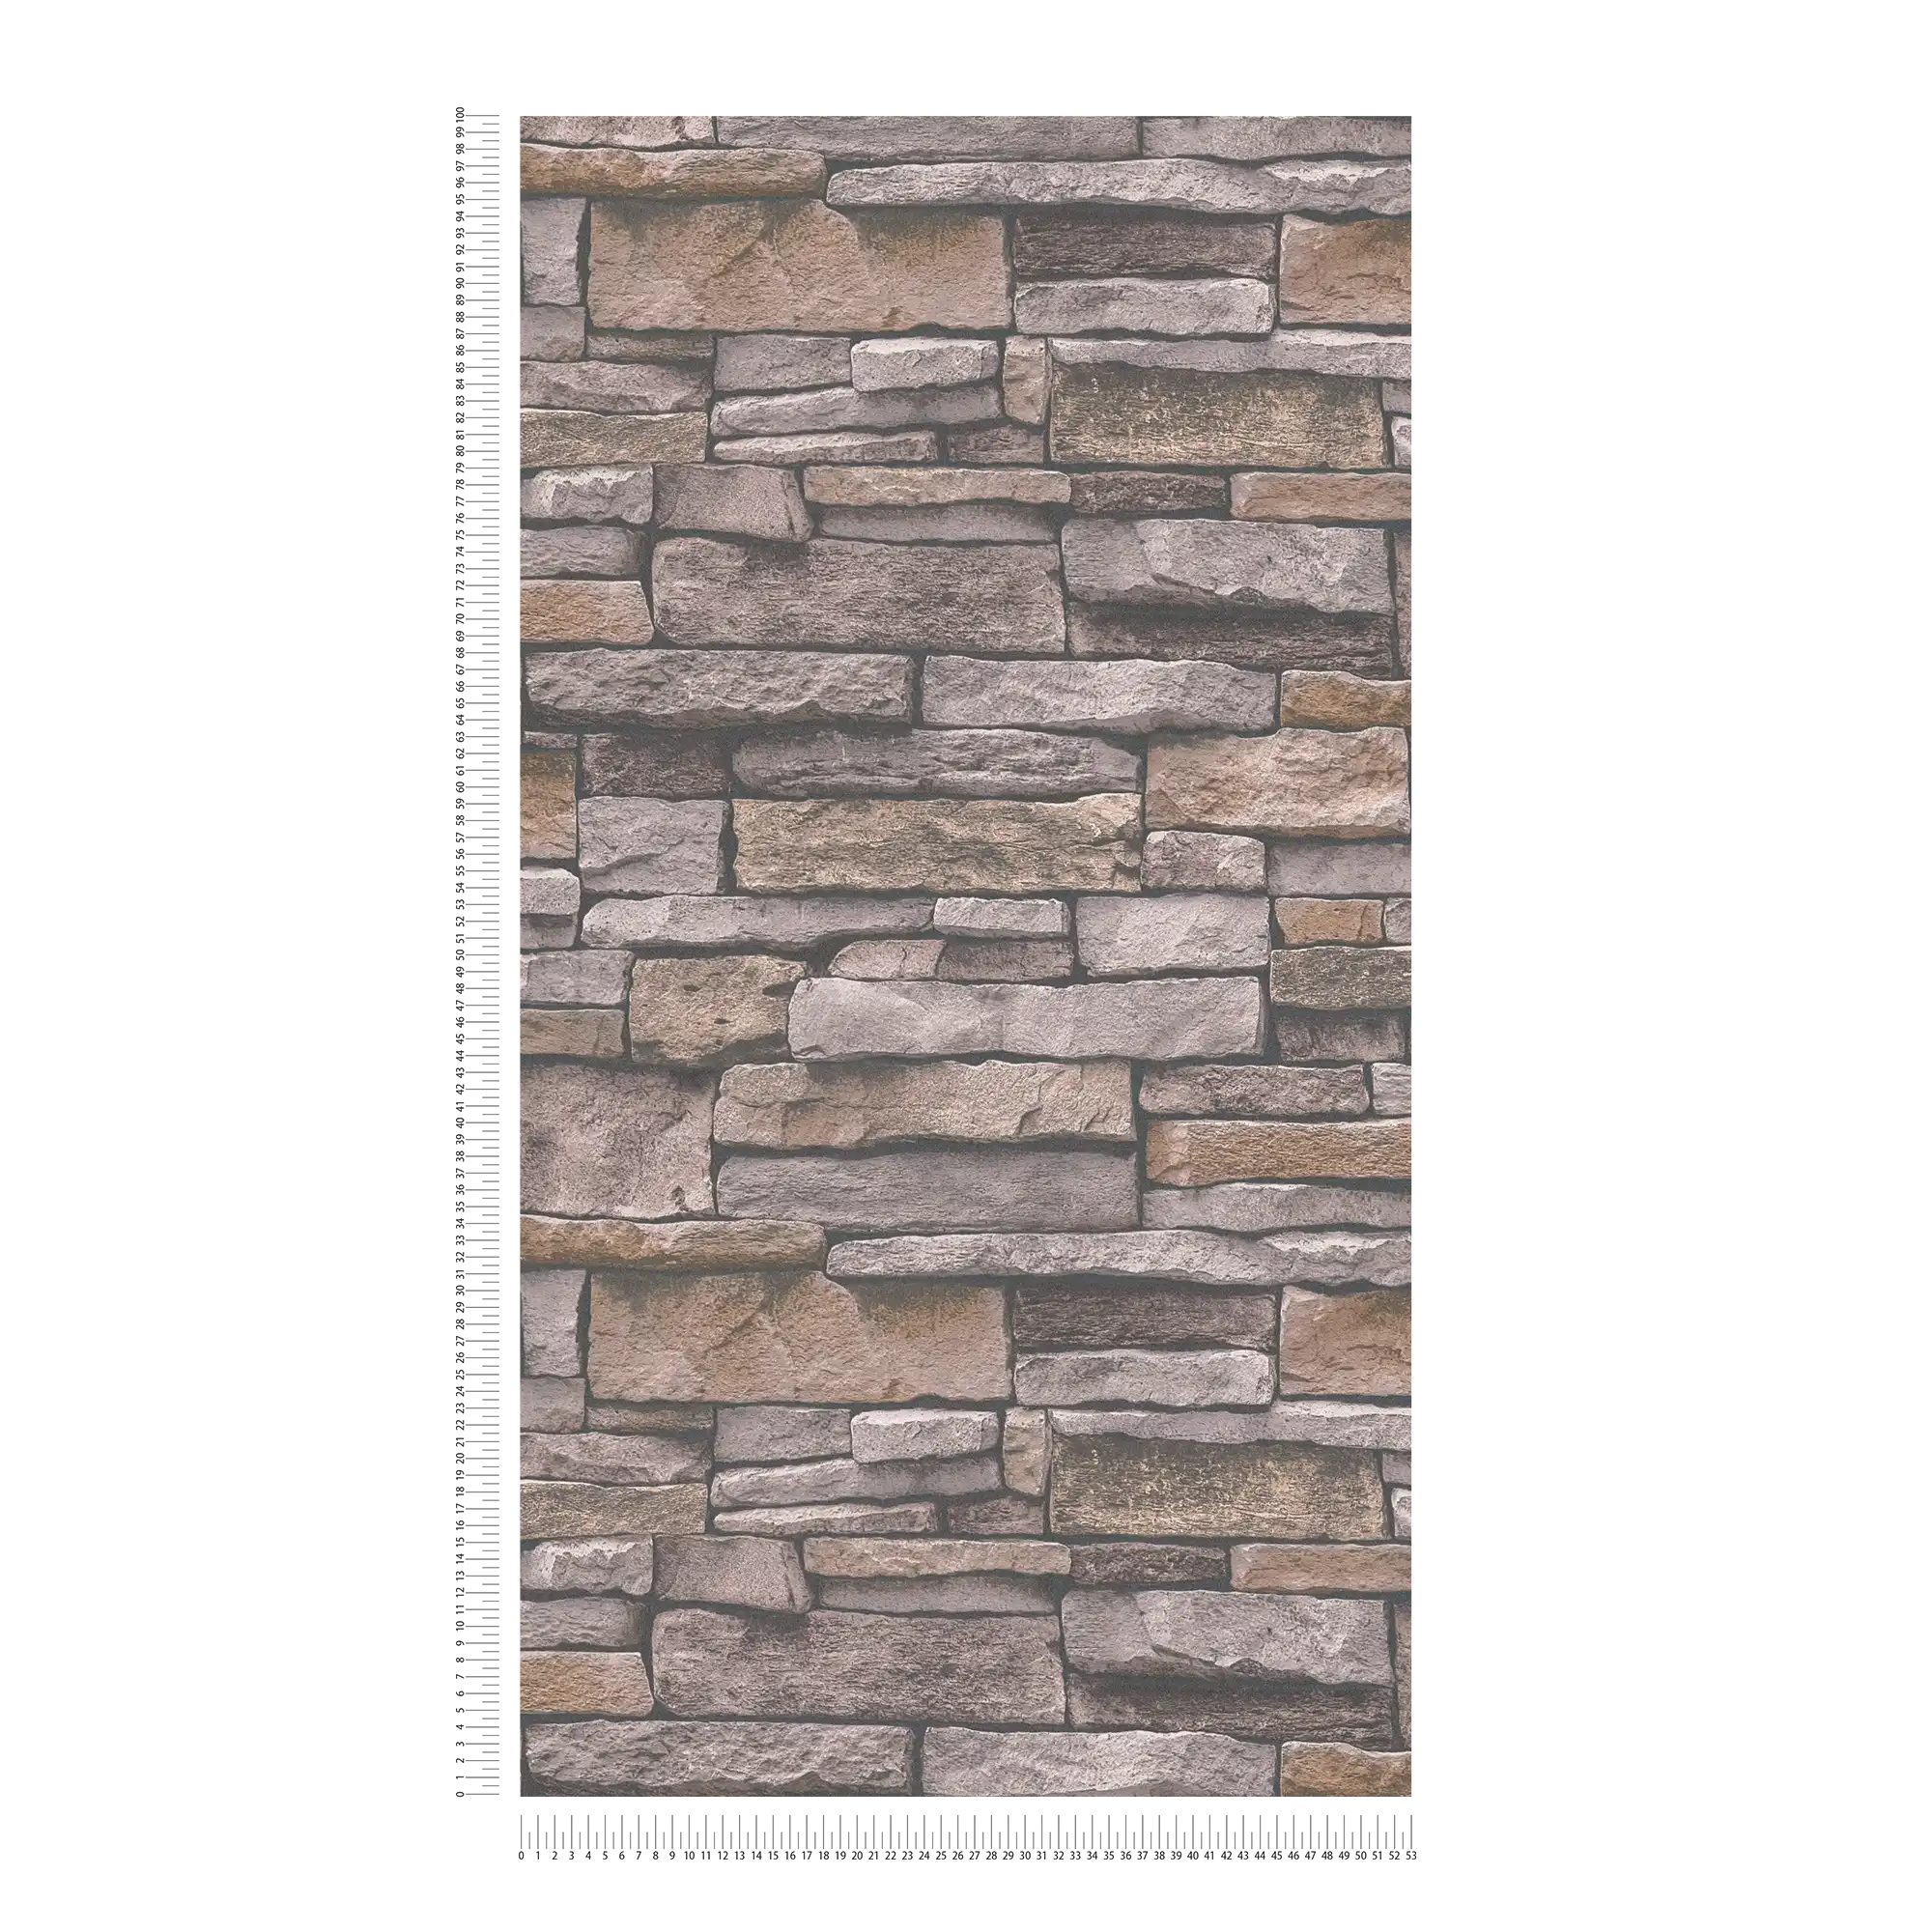             Stone-look non-woven wallpaper with natural stone wall - beige, brown
        